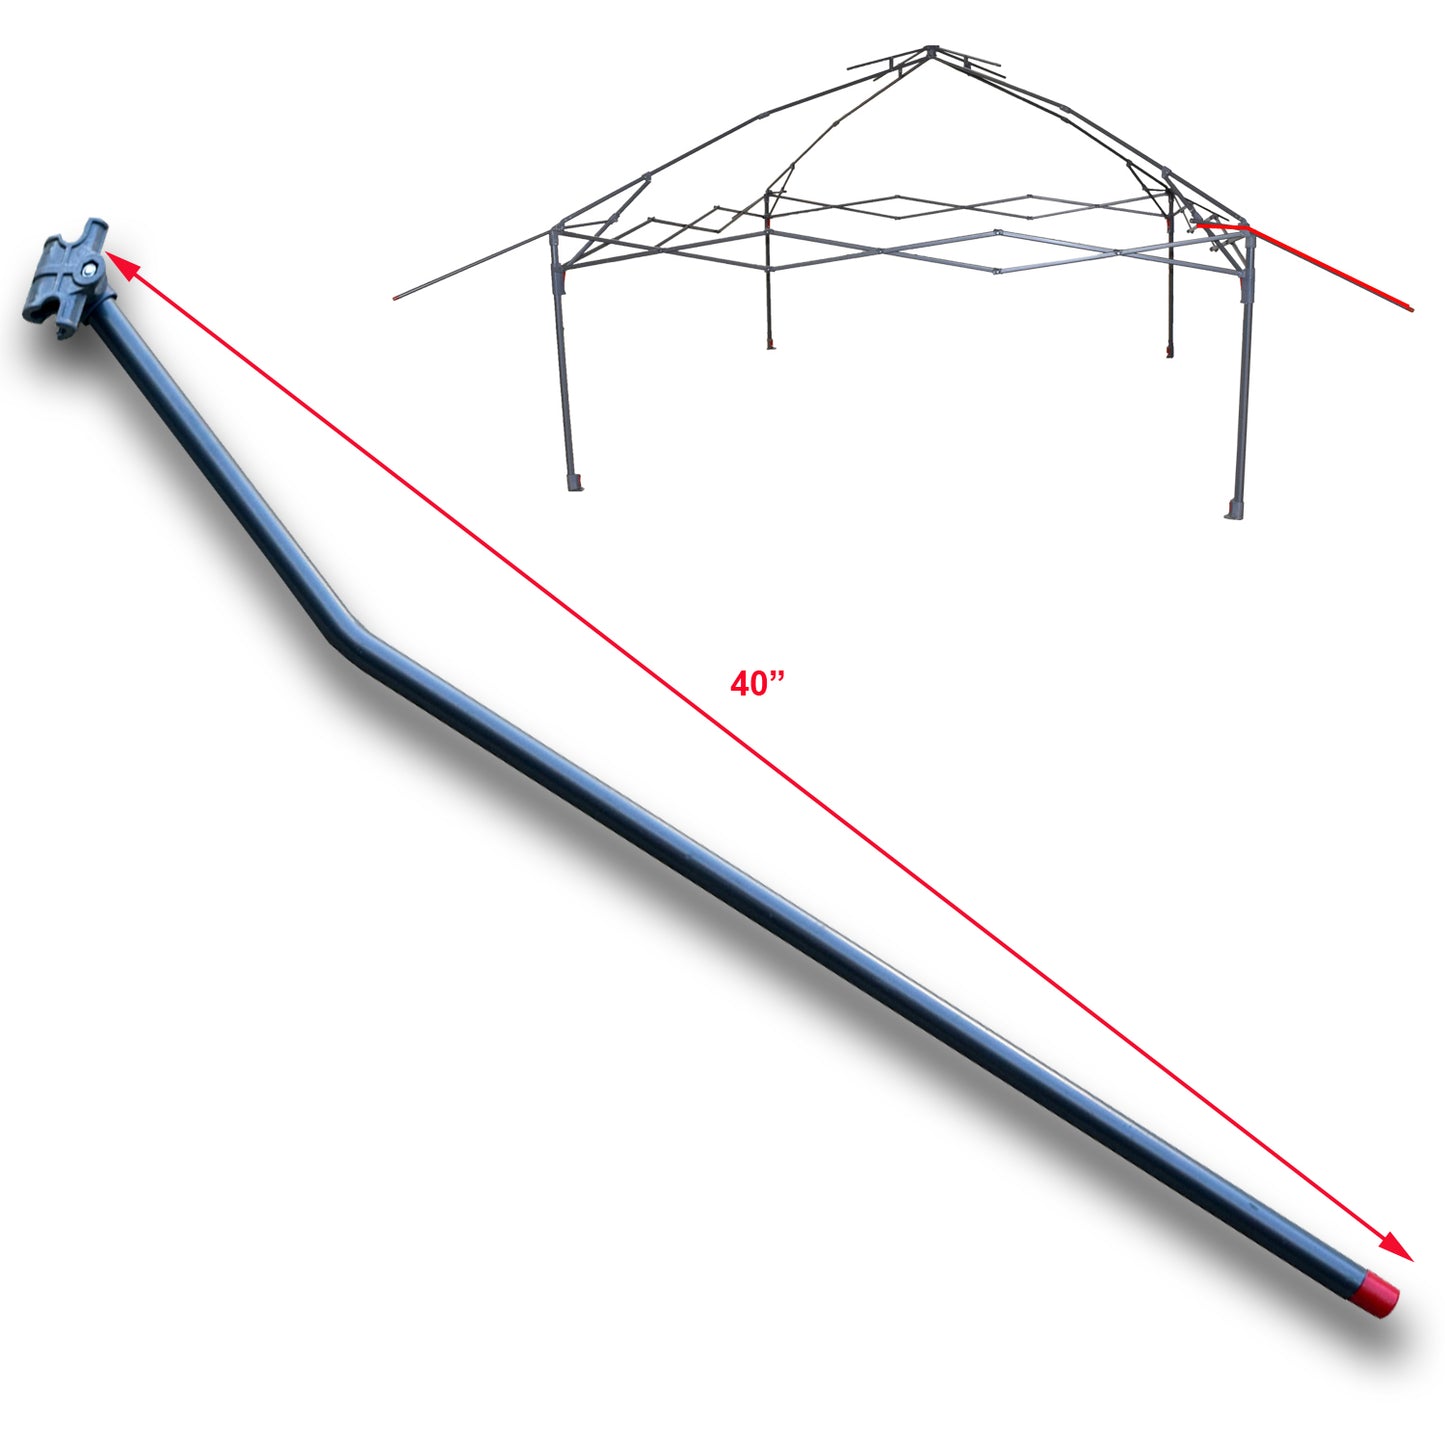 Copy of for Coleman 13' x 13' Shelter Straight Leg Instant Canopy Gazebo Peak Truss Bar W/Support Part